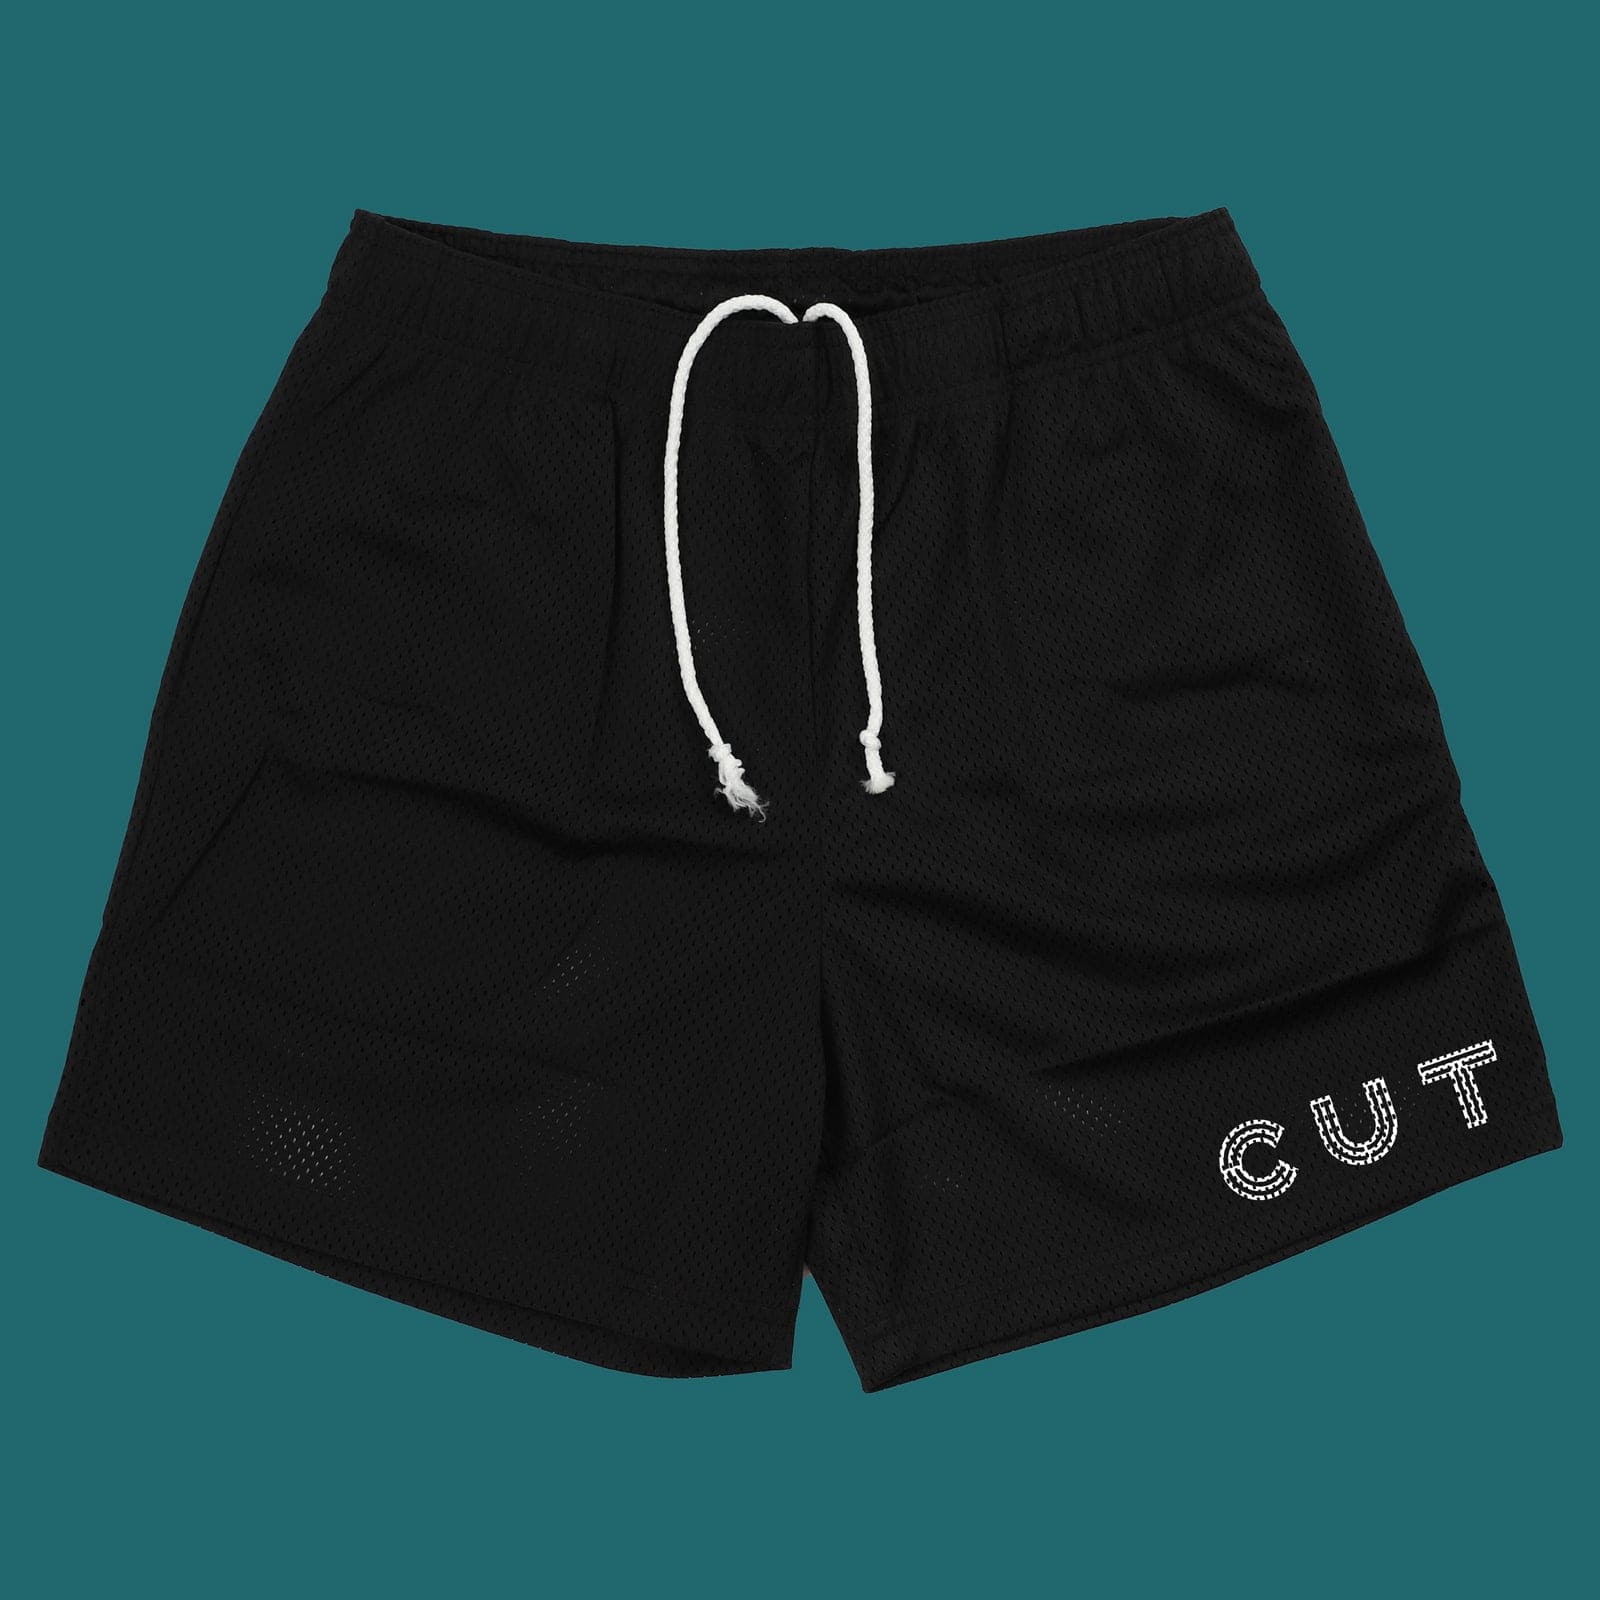 CUT Mesh Athletic Shorts | Black or Olive Green